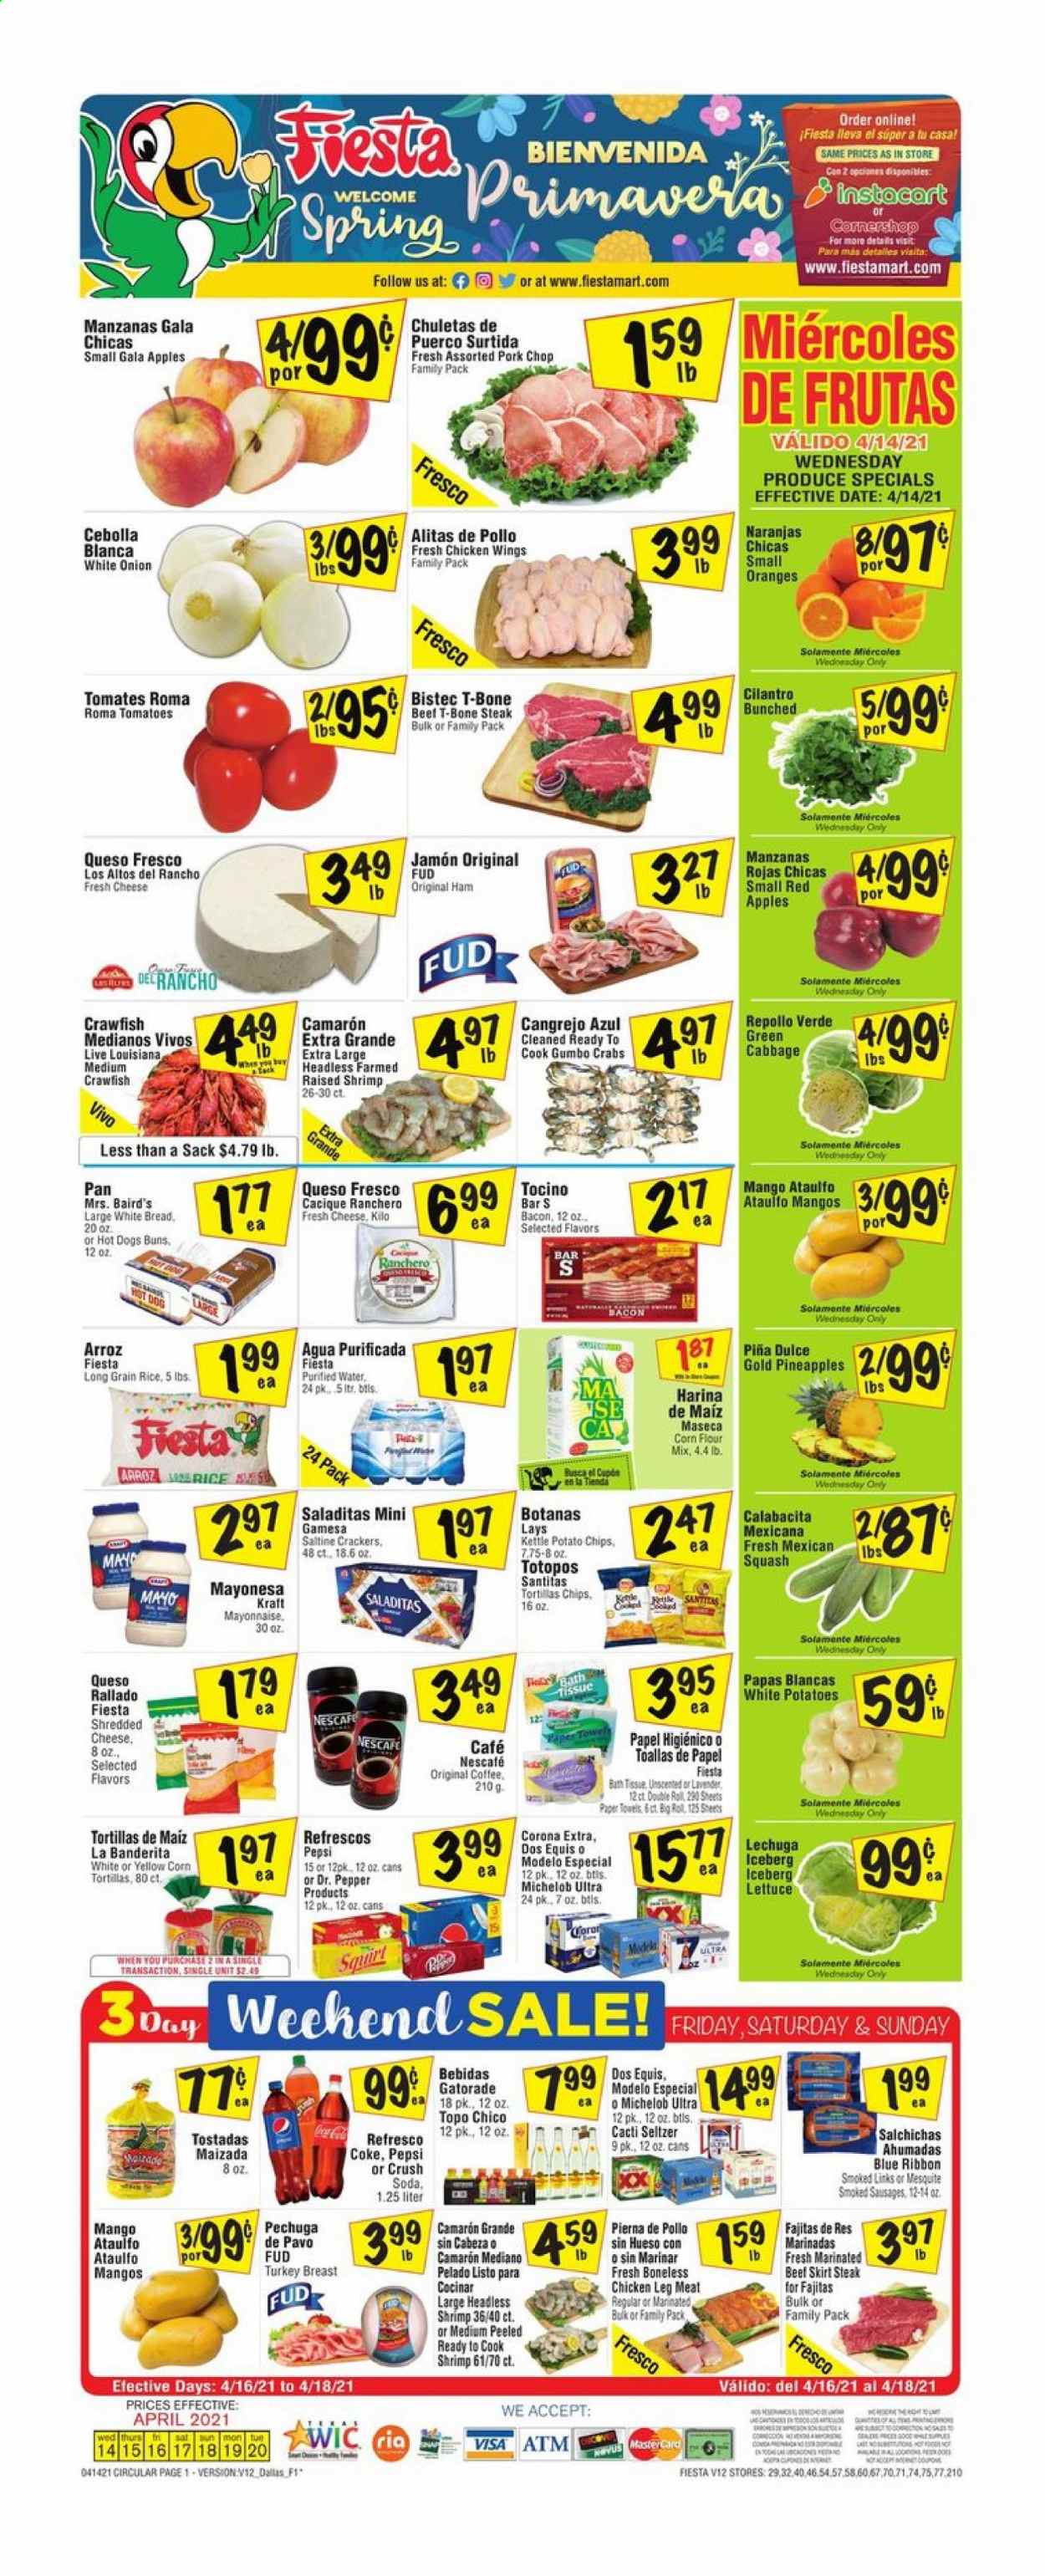 thumbnail - Fiesta Mart Flyer - 04/14/2021 - 04/20/2021 - Sales products - Dos Equis, Michelob, lettuce, corn tortillas, tortillas, white bread, buns, tostadas, cabbage, tomatoes, apples, Gala, mango, oranges, crab, shrimps, hot dog, fajita, Kraft®, bacon, ham, sausage, shredded cheese, queso fresco, mayonnaise, crawfish, chicken wings, crackers, potato chips, chips, Lay’s, flour, long grain rice, cilantro, Coca-Cola, Pepsi, soda, Dr. Pepper, Gatorade, seltzer water, purified water, coffee, Nescafé, beer, Corona Extra, Modelo, turkey breast, chicken legs, beef meat, t-bone steak, steak, marinated beef, pork chops, pork meat, bath tissue, kitchen towels, paper towels, skirt, pineapple, onion. Page 1.